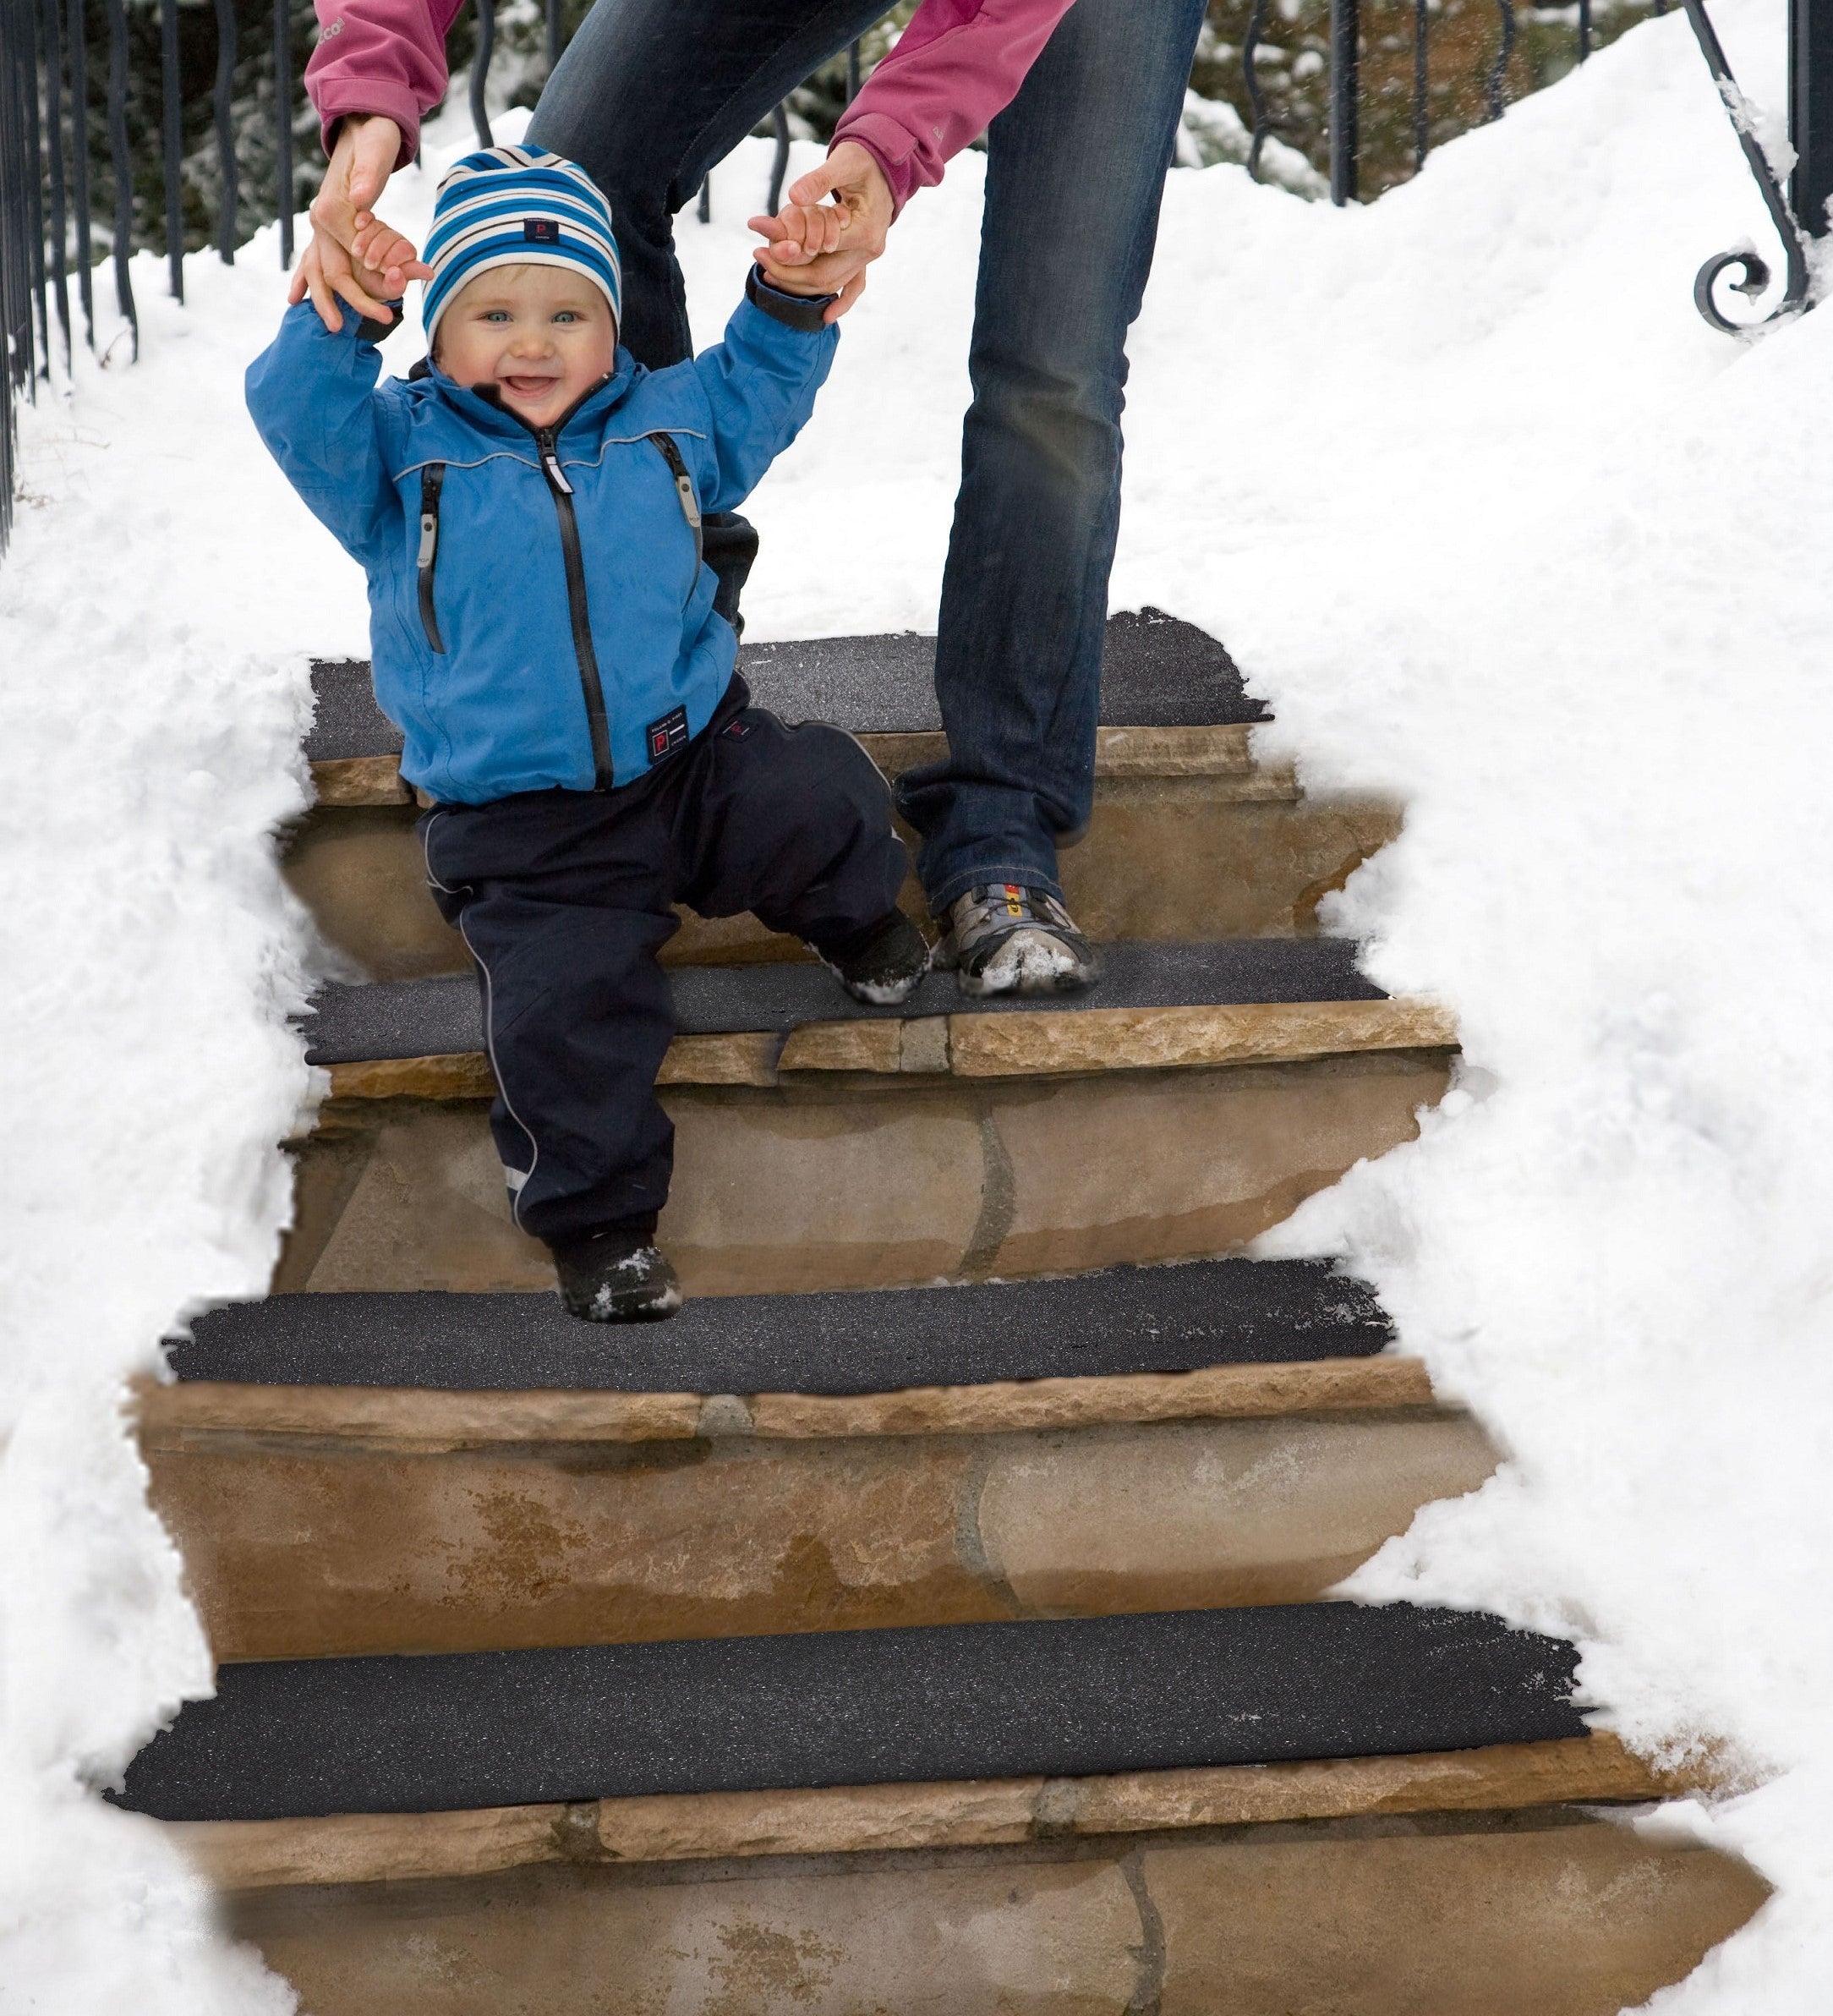 HeatTrak Snow and Ice Melting Mats for Stairs feature a watertight prong and socket connection, these mats connect to each other to create a custom snow removal system.